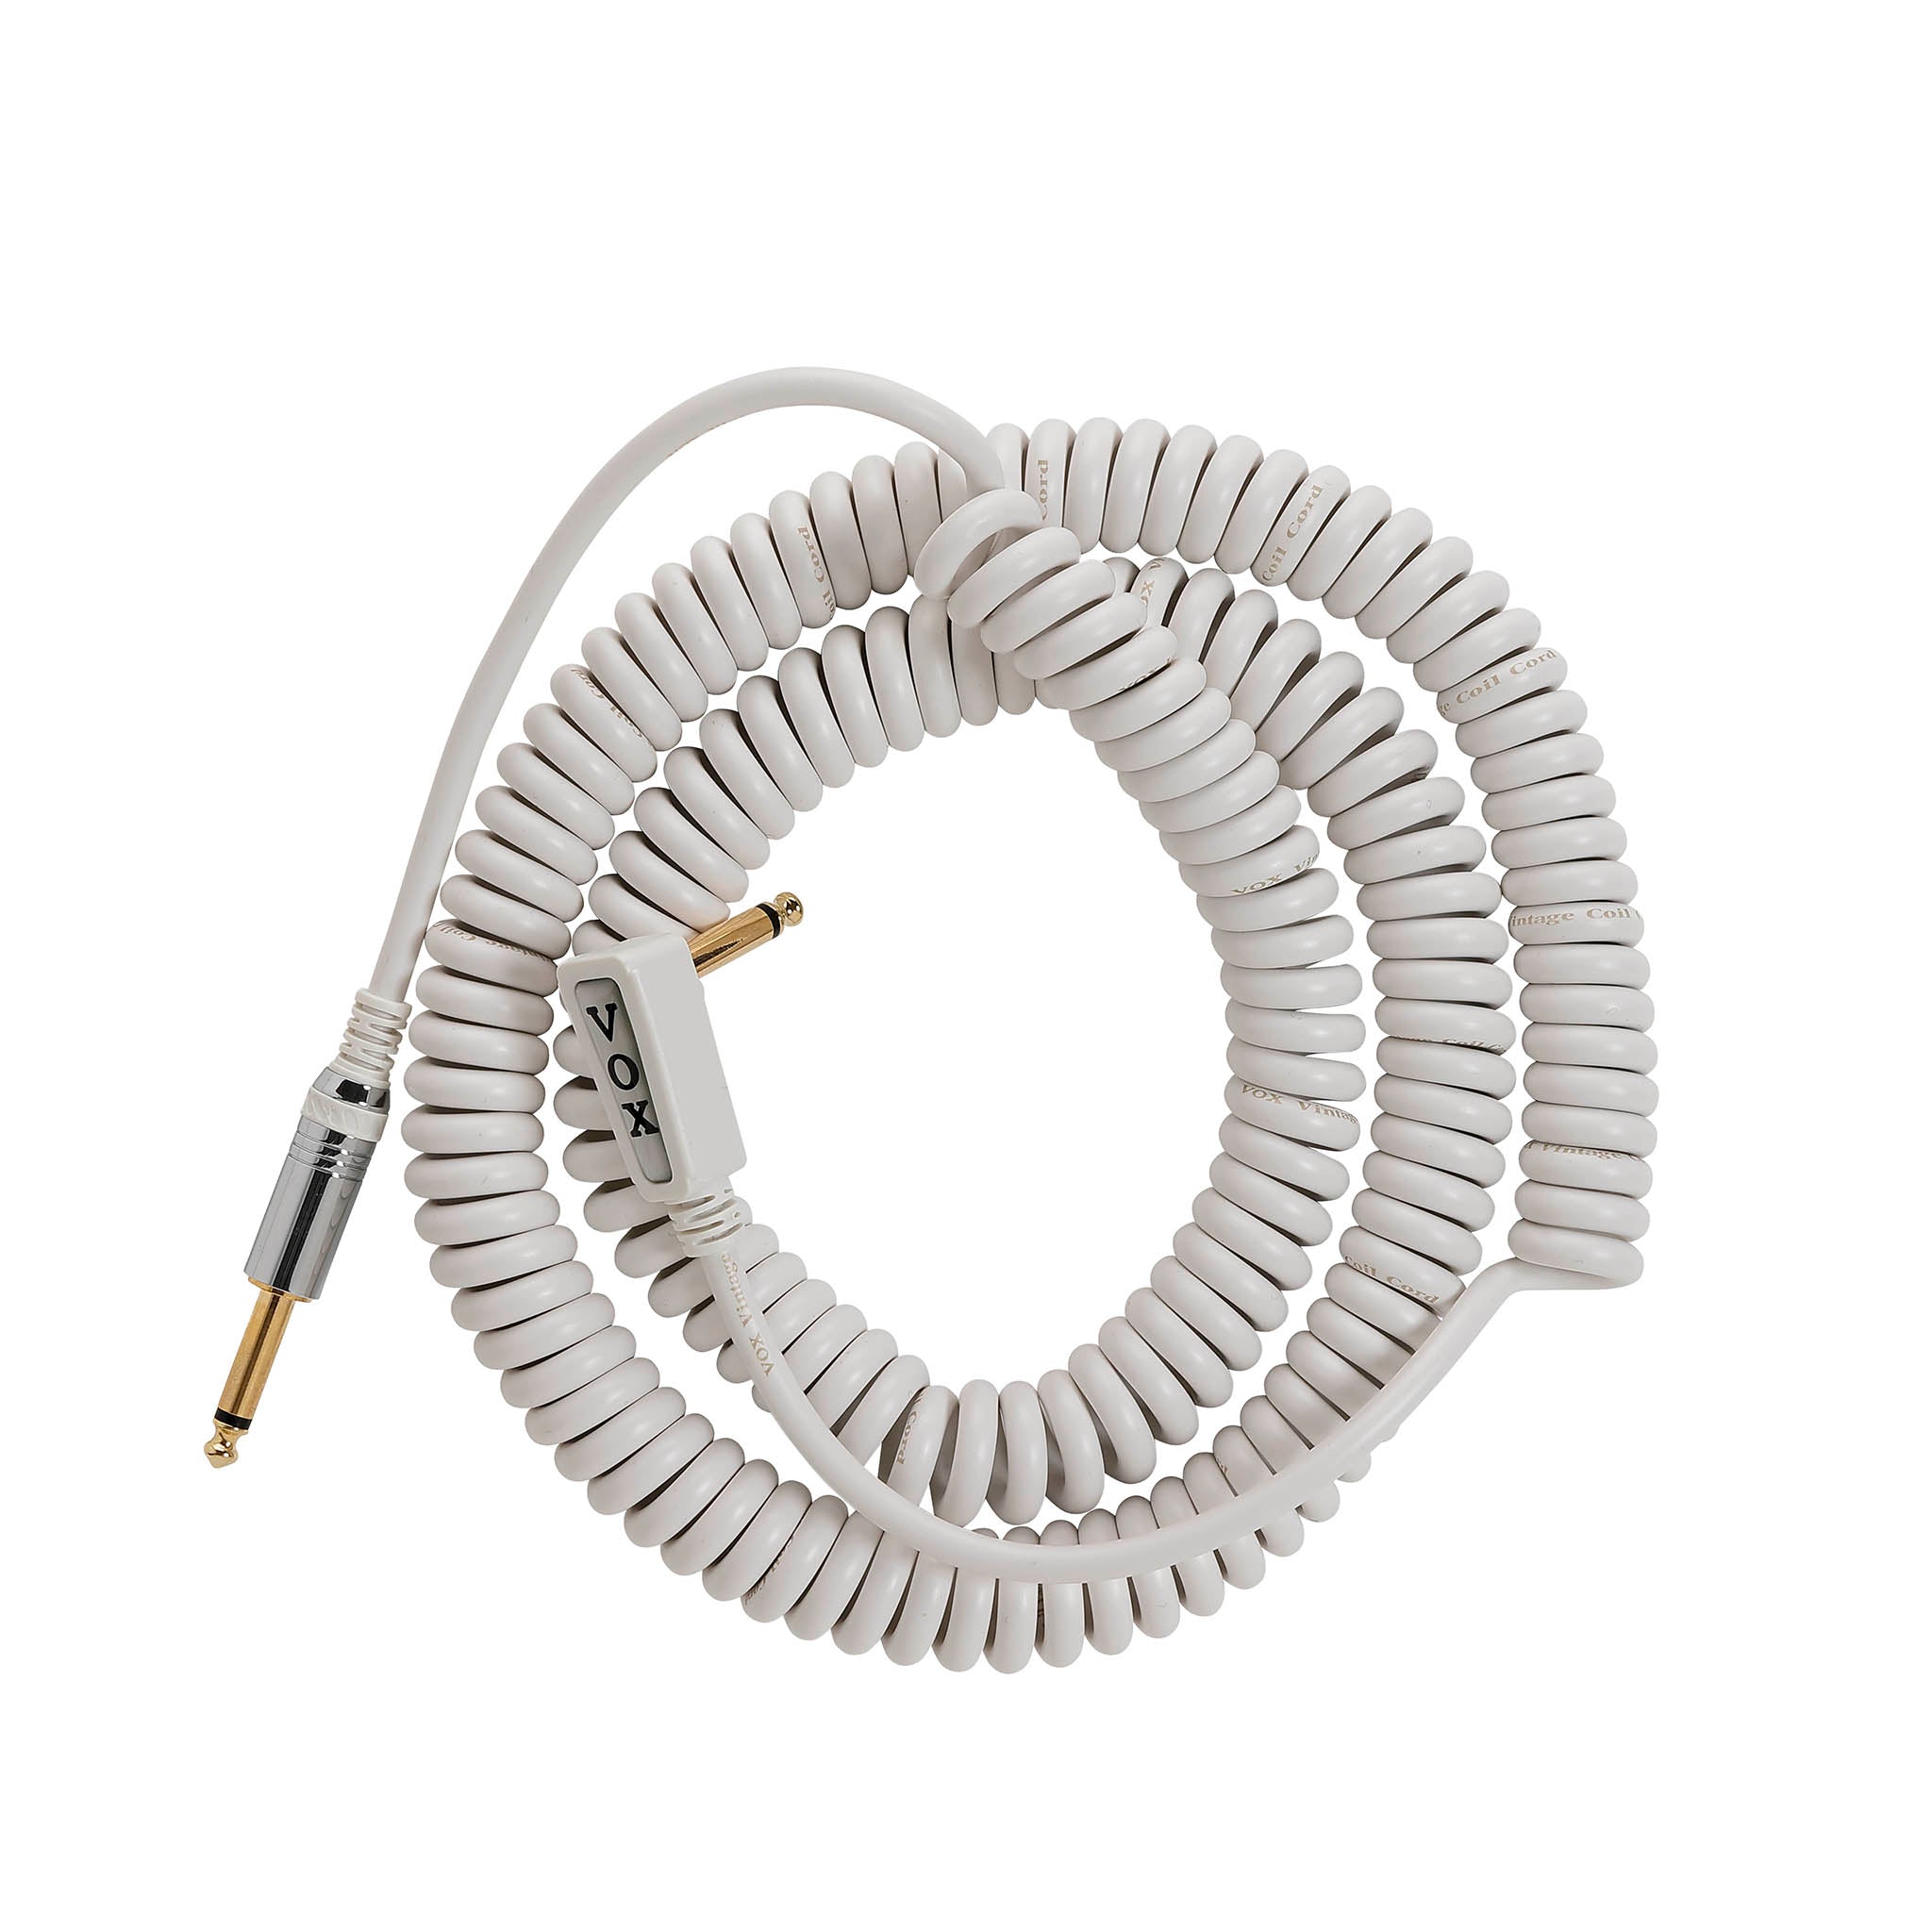 Vox Vintage Coiled Cable 5